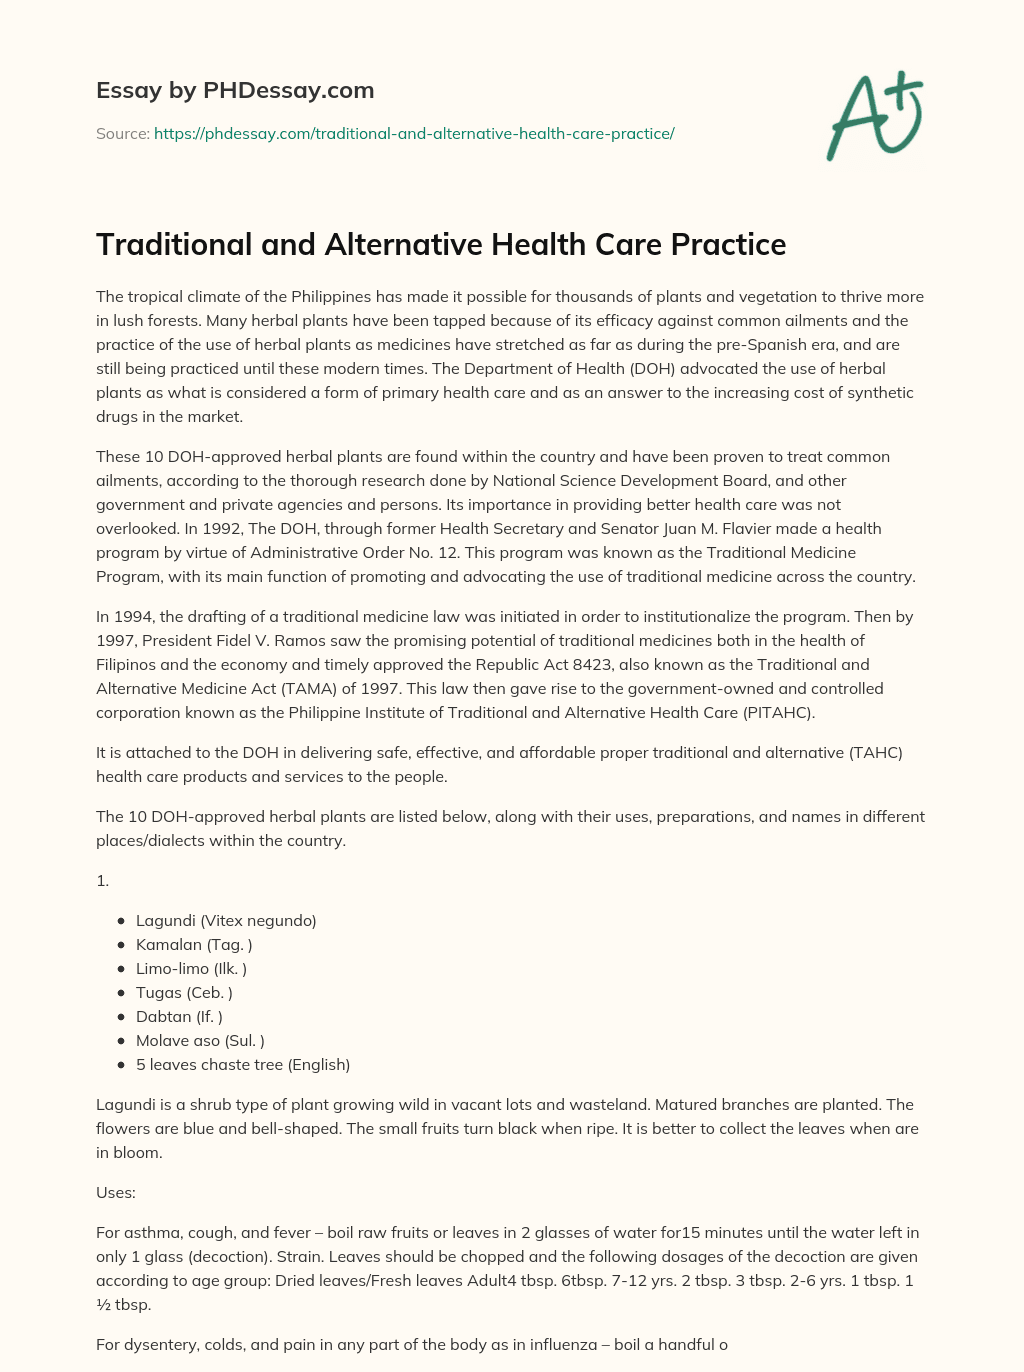 Traditional and Alternative Health Care Practice essay